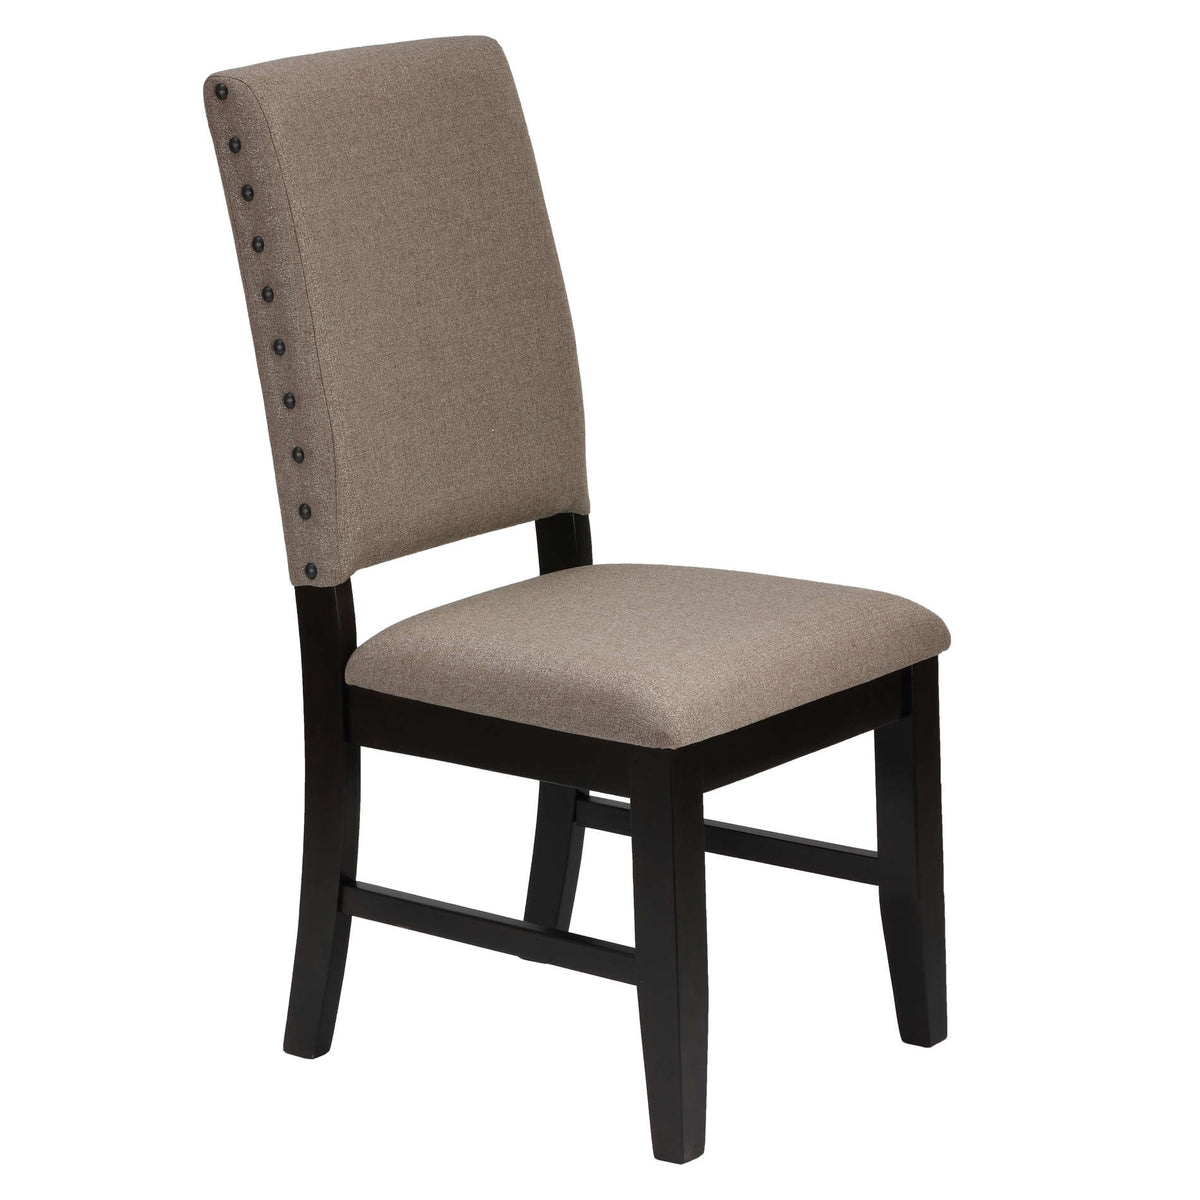 Cortesi Home Manchester Dining Chairs in Taupe Fabric with Black Wood Legs and Nailhead Accents, Set of 2